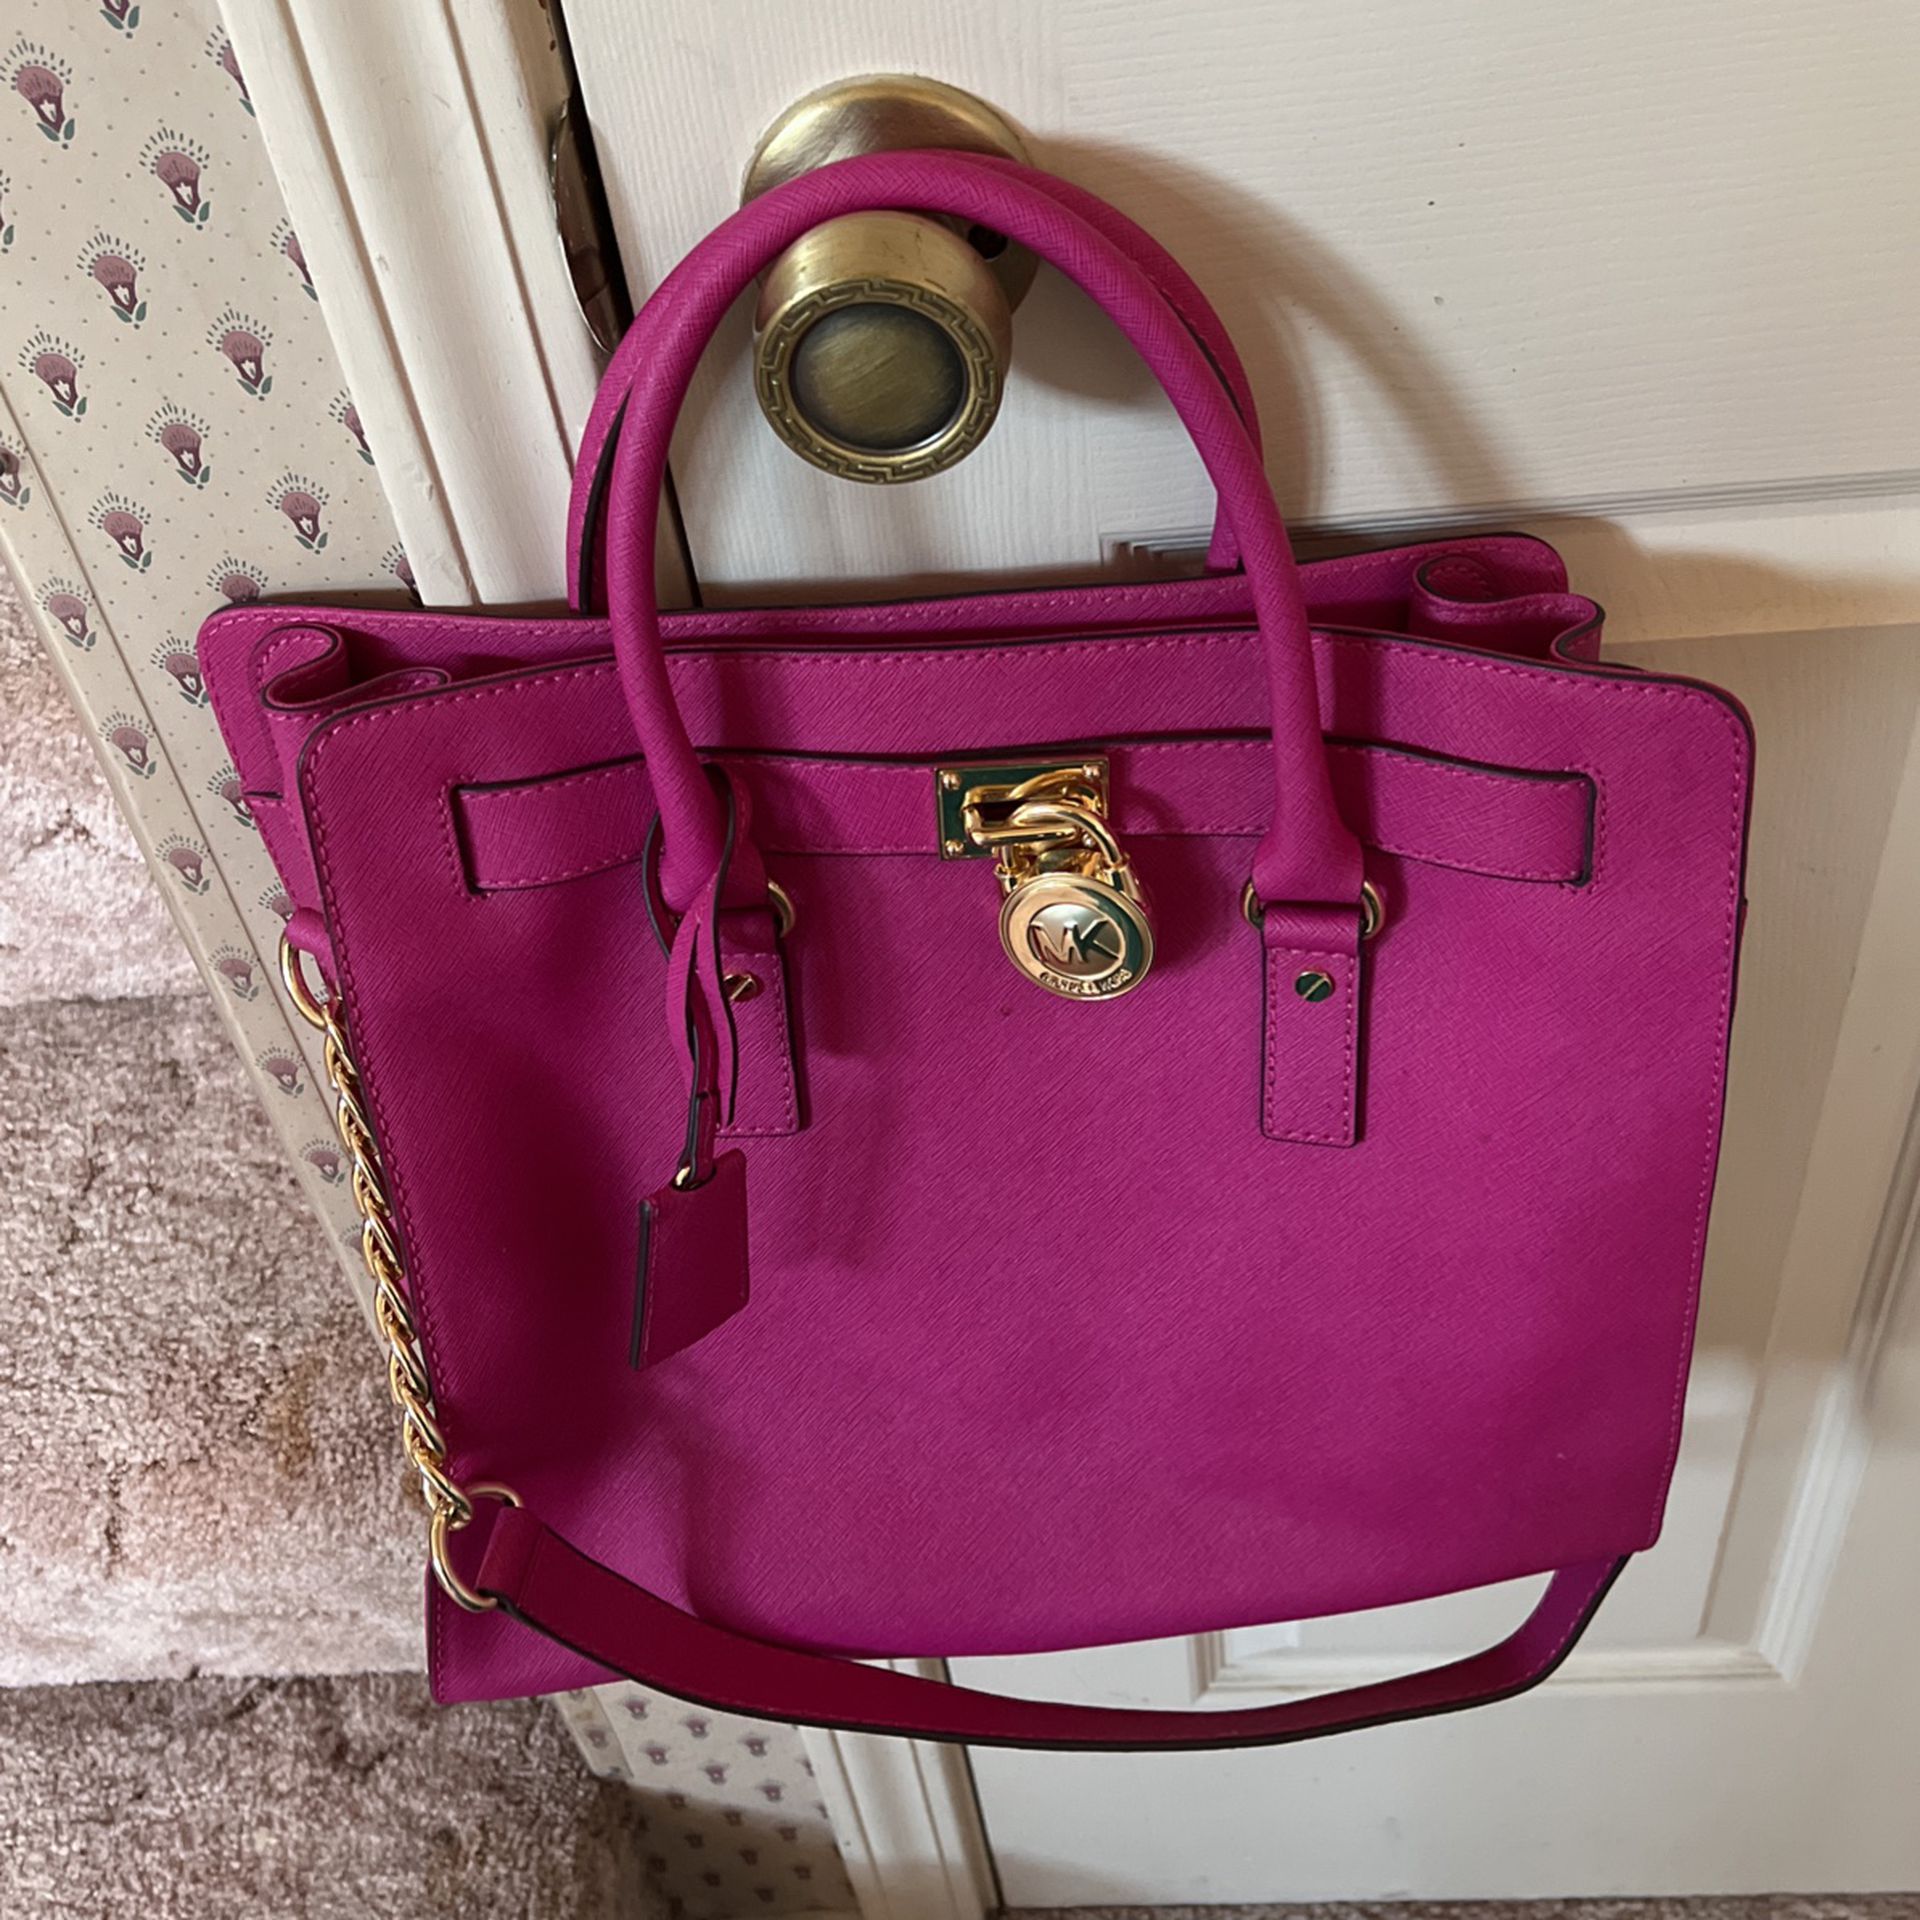 udstrømning Donation Forvirrede Michael Kors Purse Pink With Gold Hardware for Sale in Tracy, CA - OfferUp